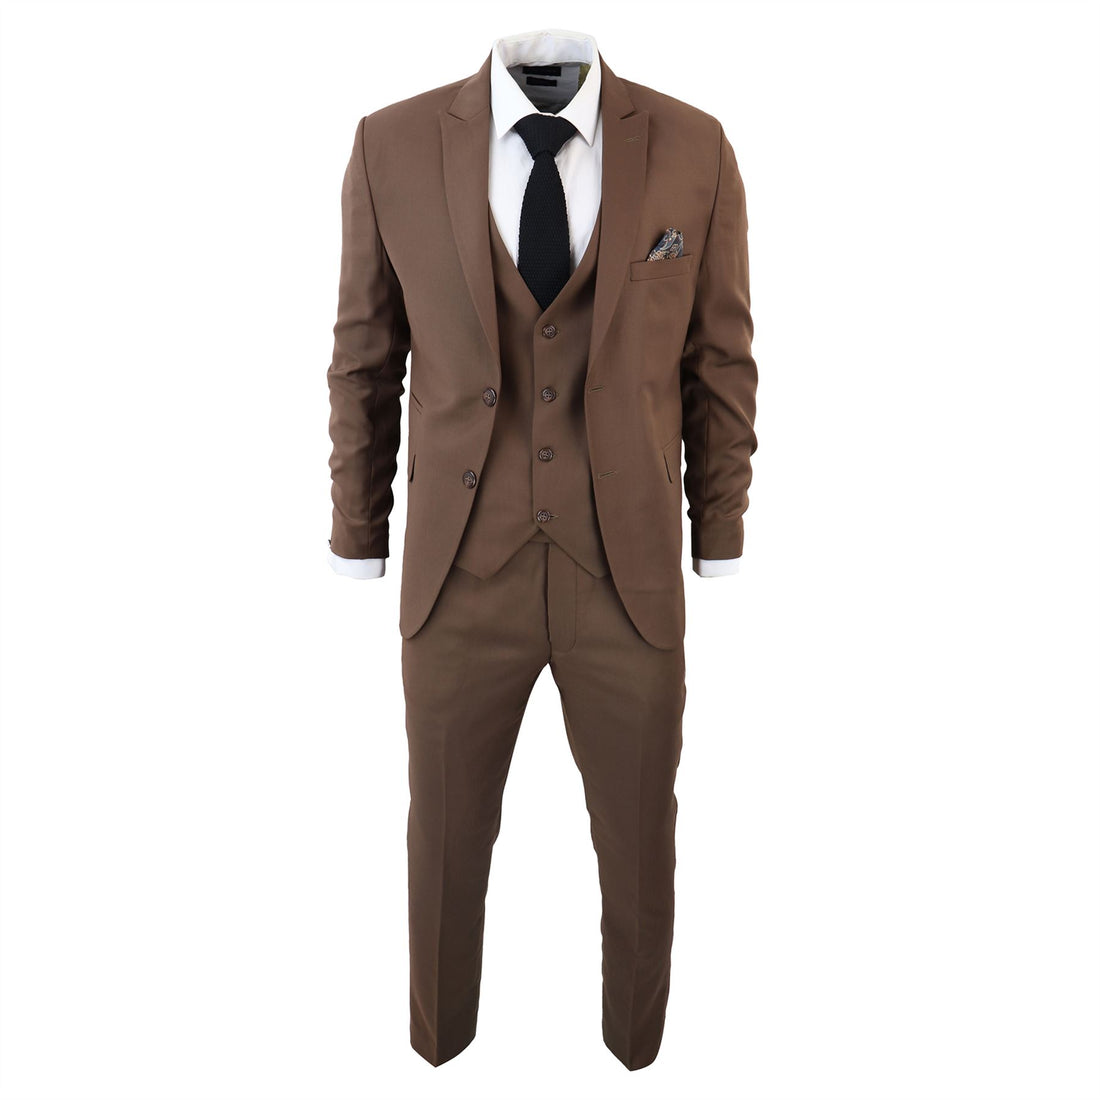 Men's Classic Brown Suit 3 Piece Tailored Fit Vintage Office Wedding Prom